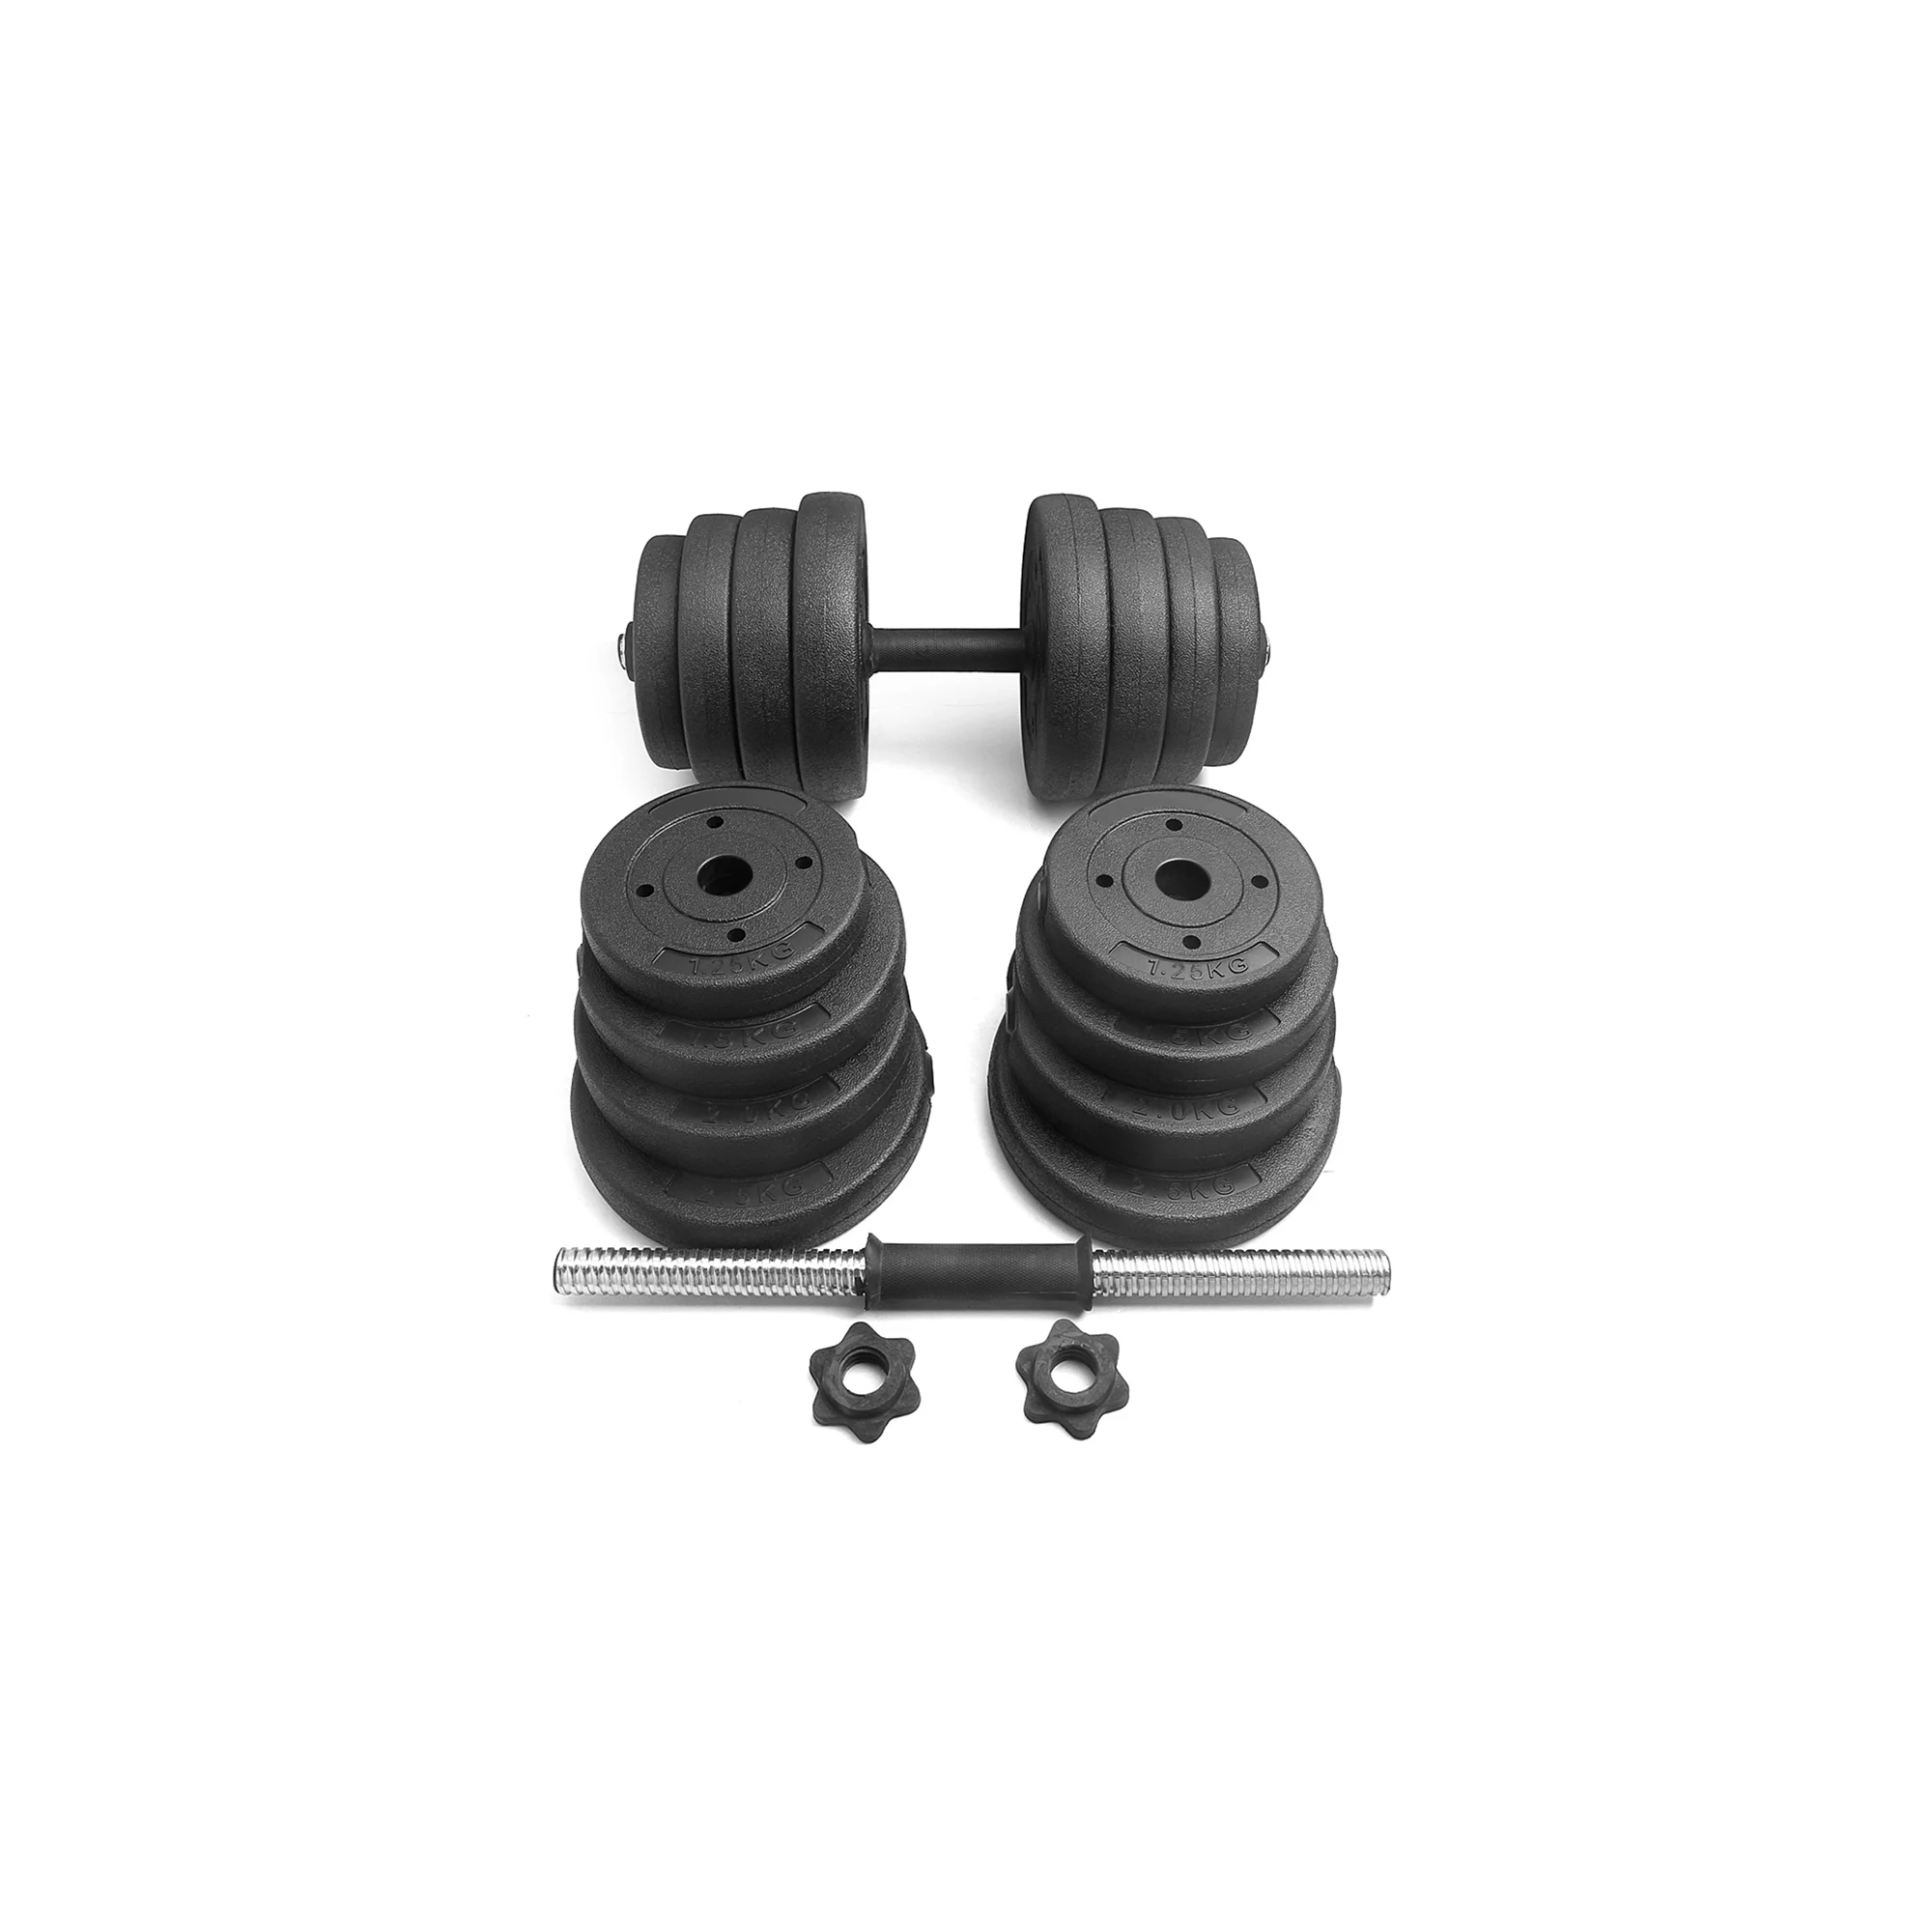 Weight <a href='/dumbbell-set/'>Dumbbell Set</a> Adjustable prxkb Gym, Home <a href='/barbell-plate/'>Barbell Plate</a>s Body Workout